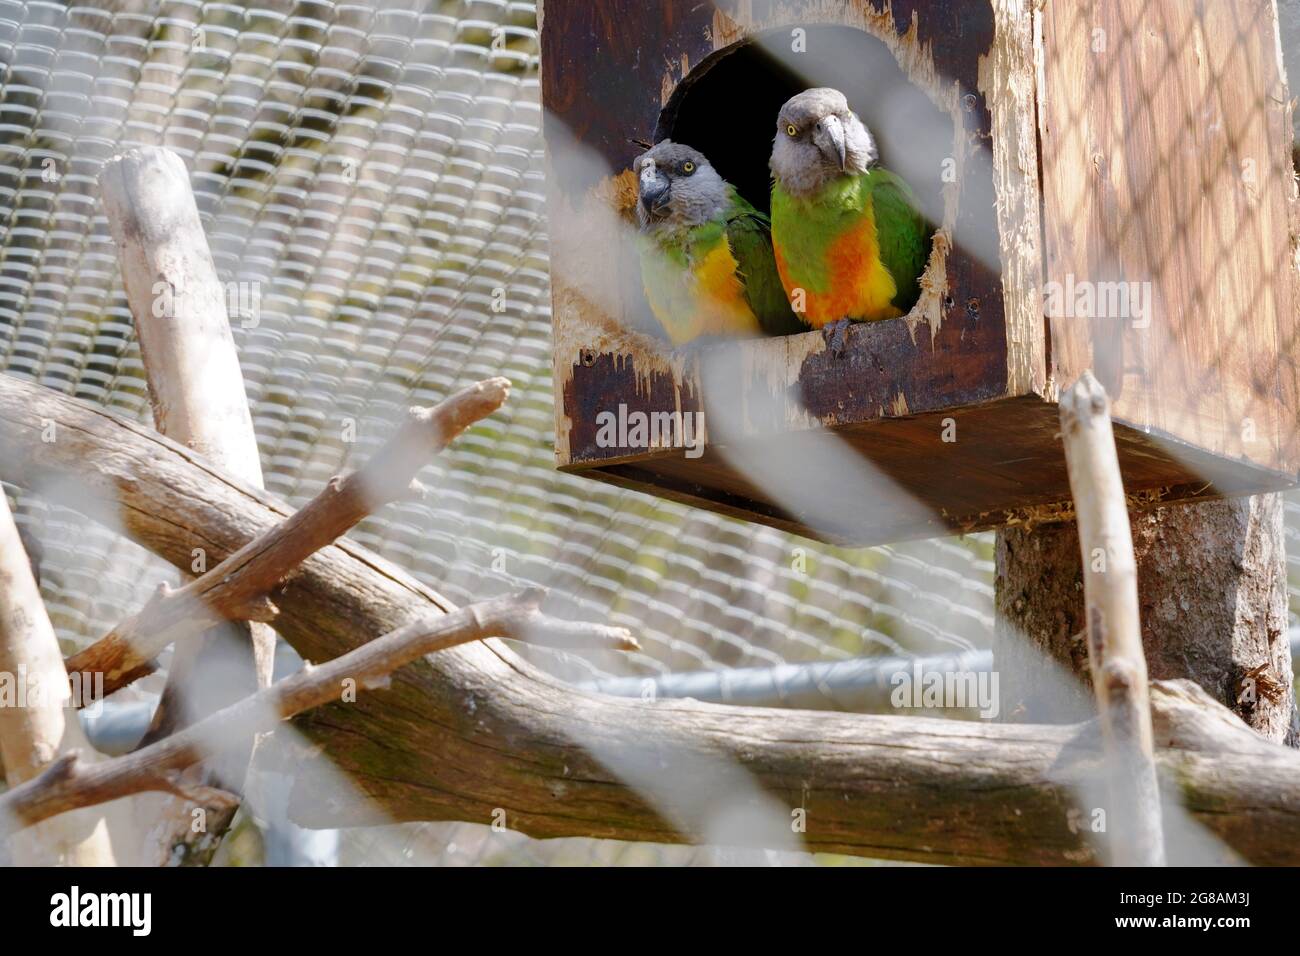 A pair of Senegal parrots in cage in a zoo. They are called Poicephalus senegalus in Latin. They are largely spread in West Africa. Stock Photo